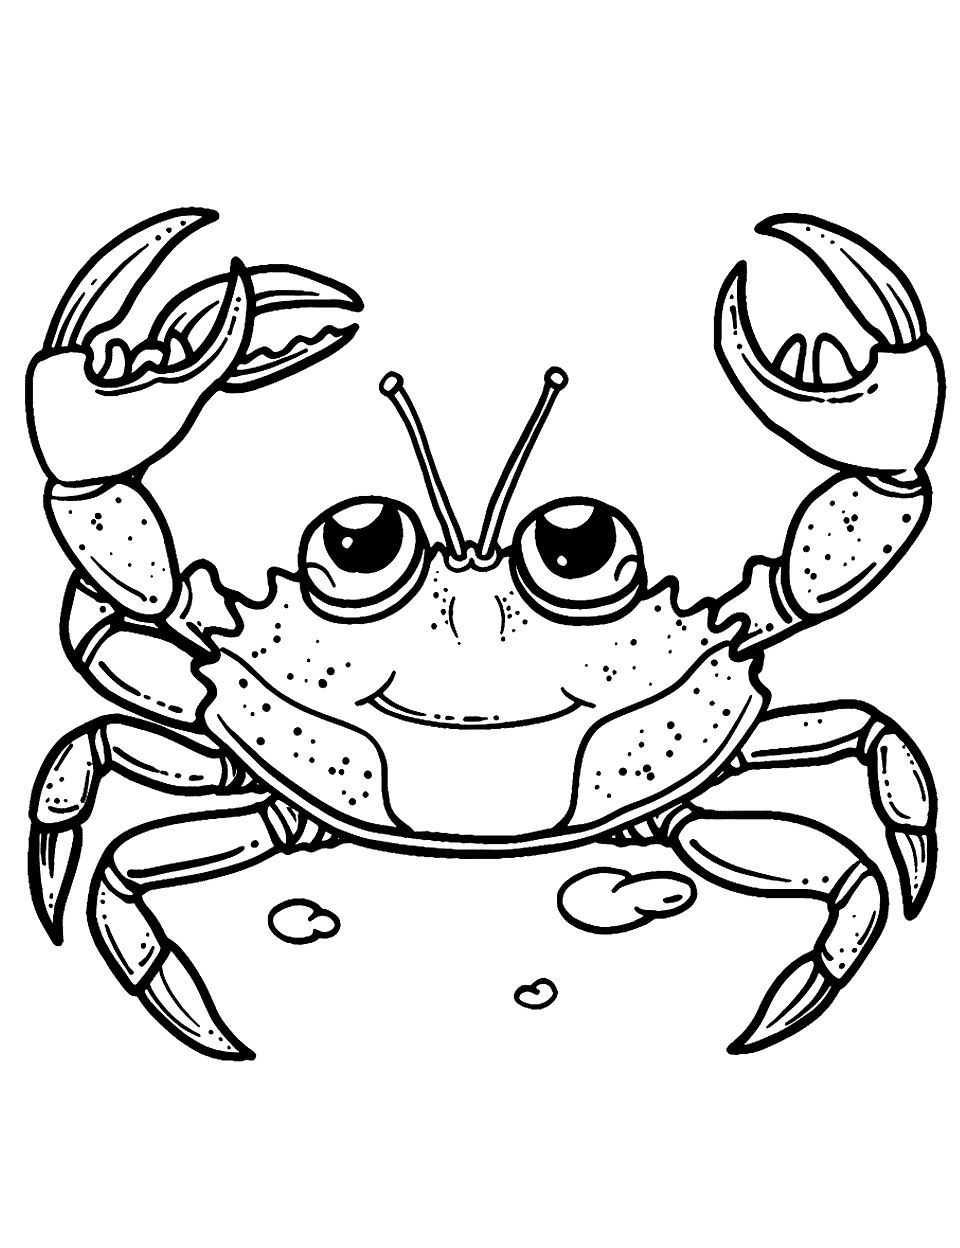 Tamatoa’s Shiny Shell Crab Coloring Page - A crab with shiny shell standing proudly.